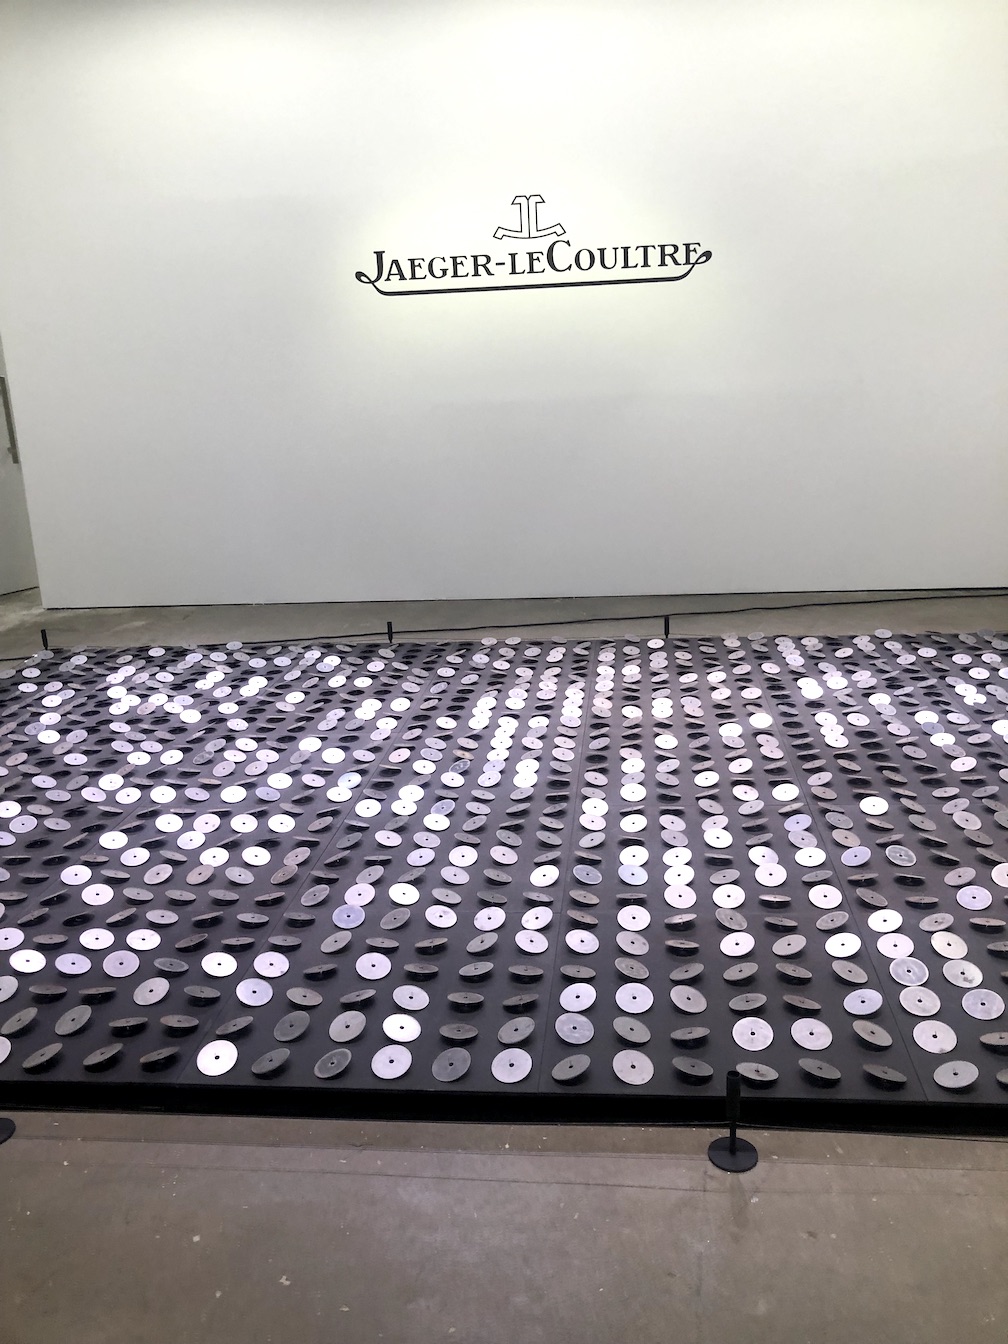 Jaeger-LeCoultre The Sound Maker exhibit in New York